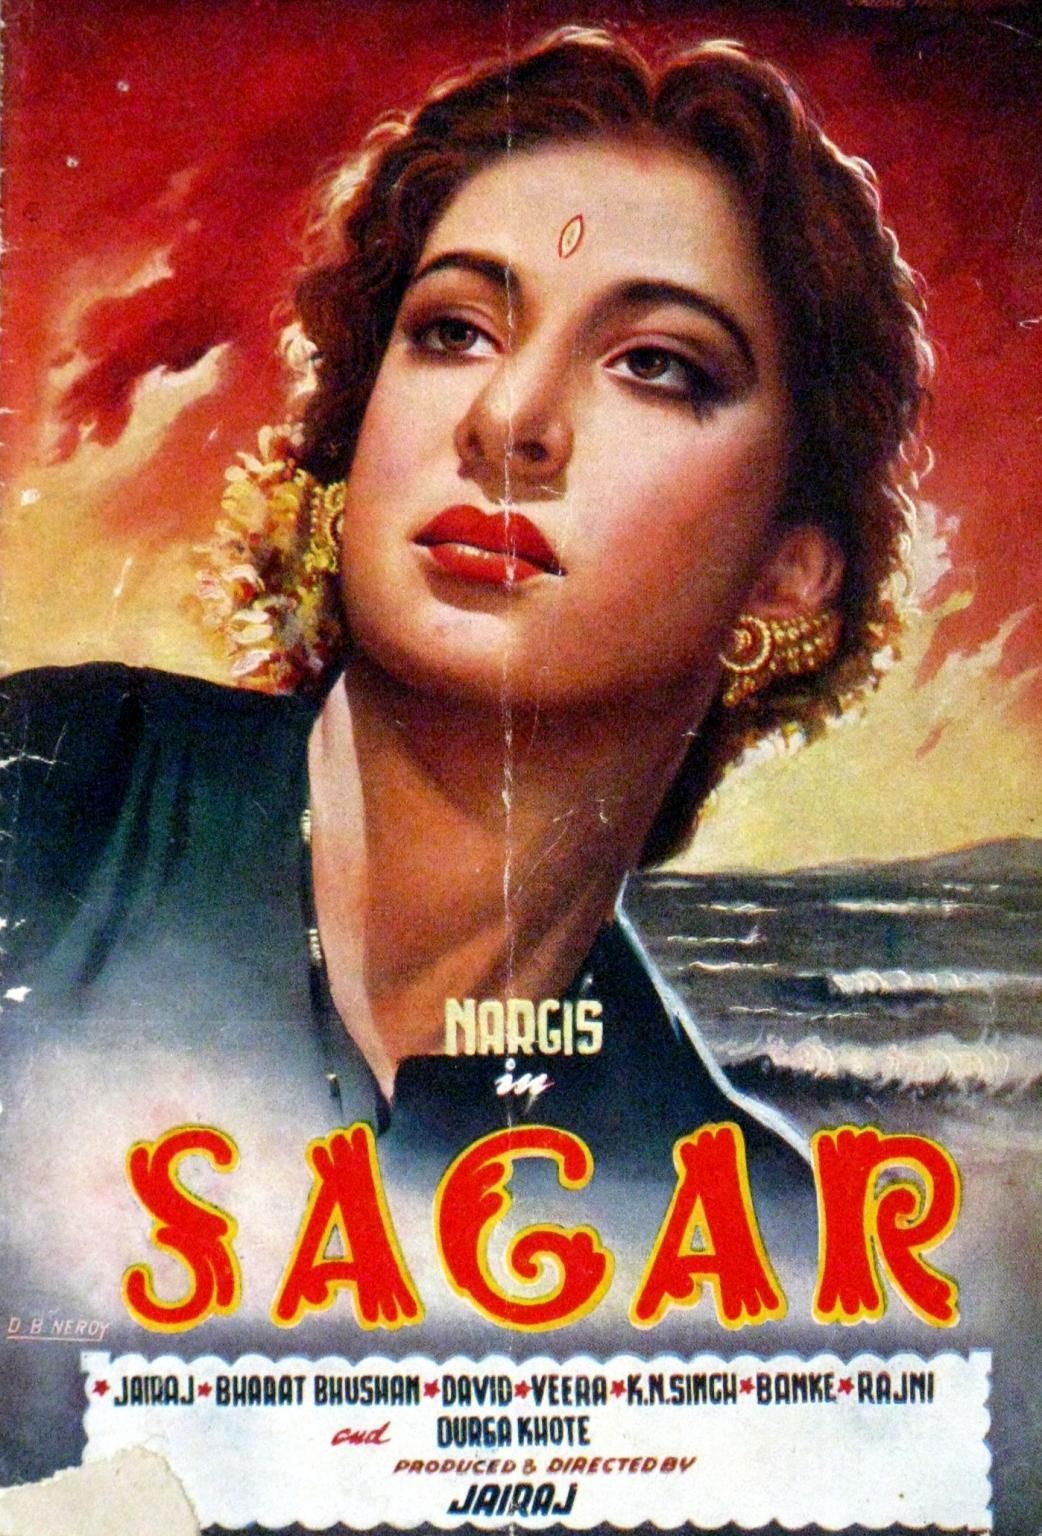 Saagar (1951). Bollywood posters, Old film posters, Old movie posters